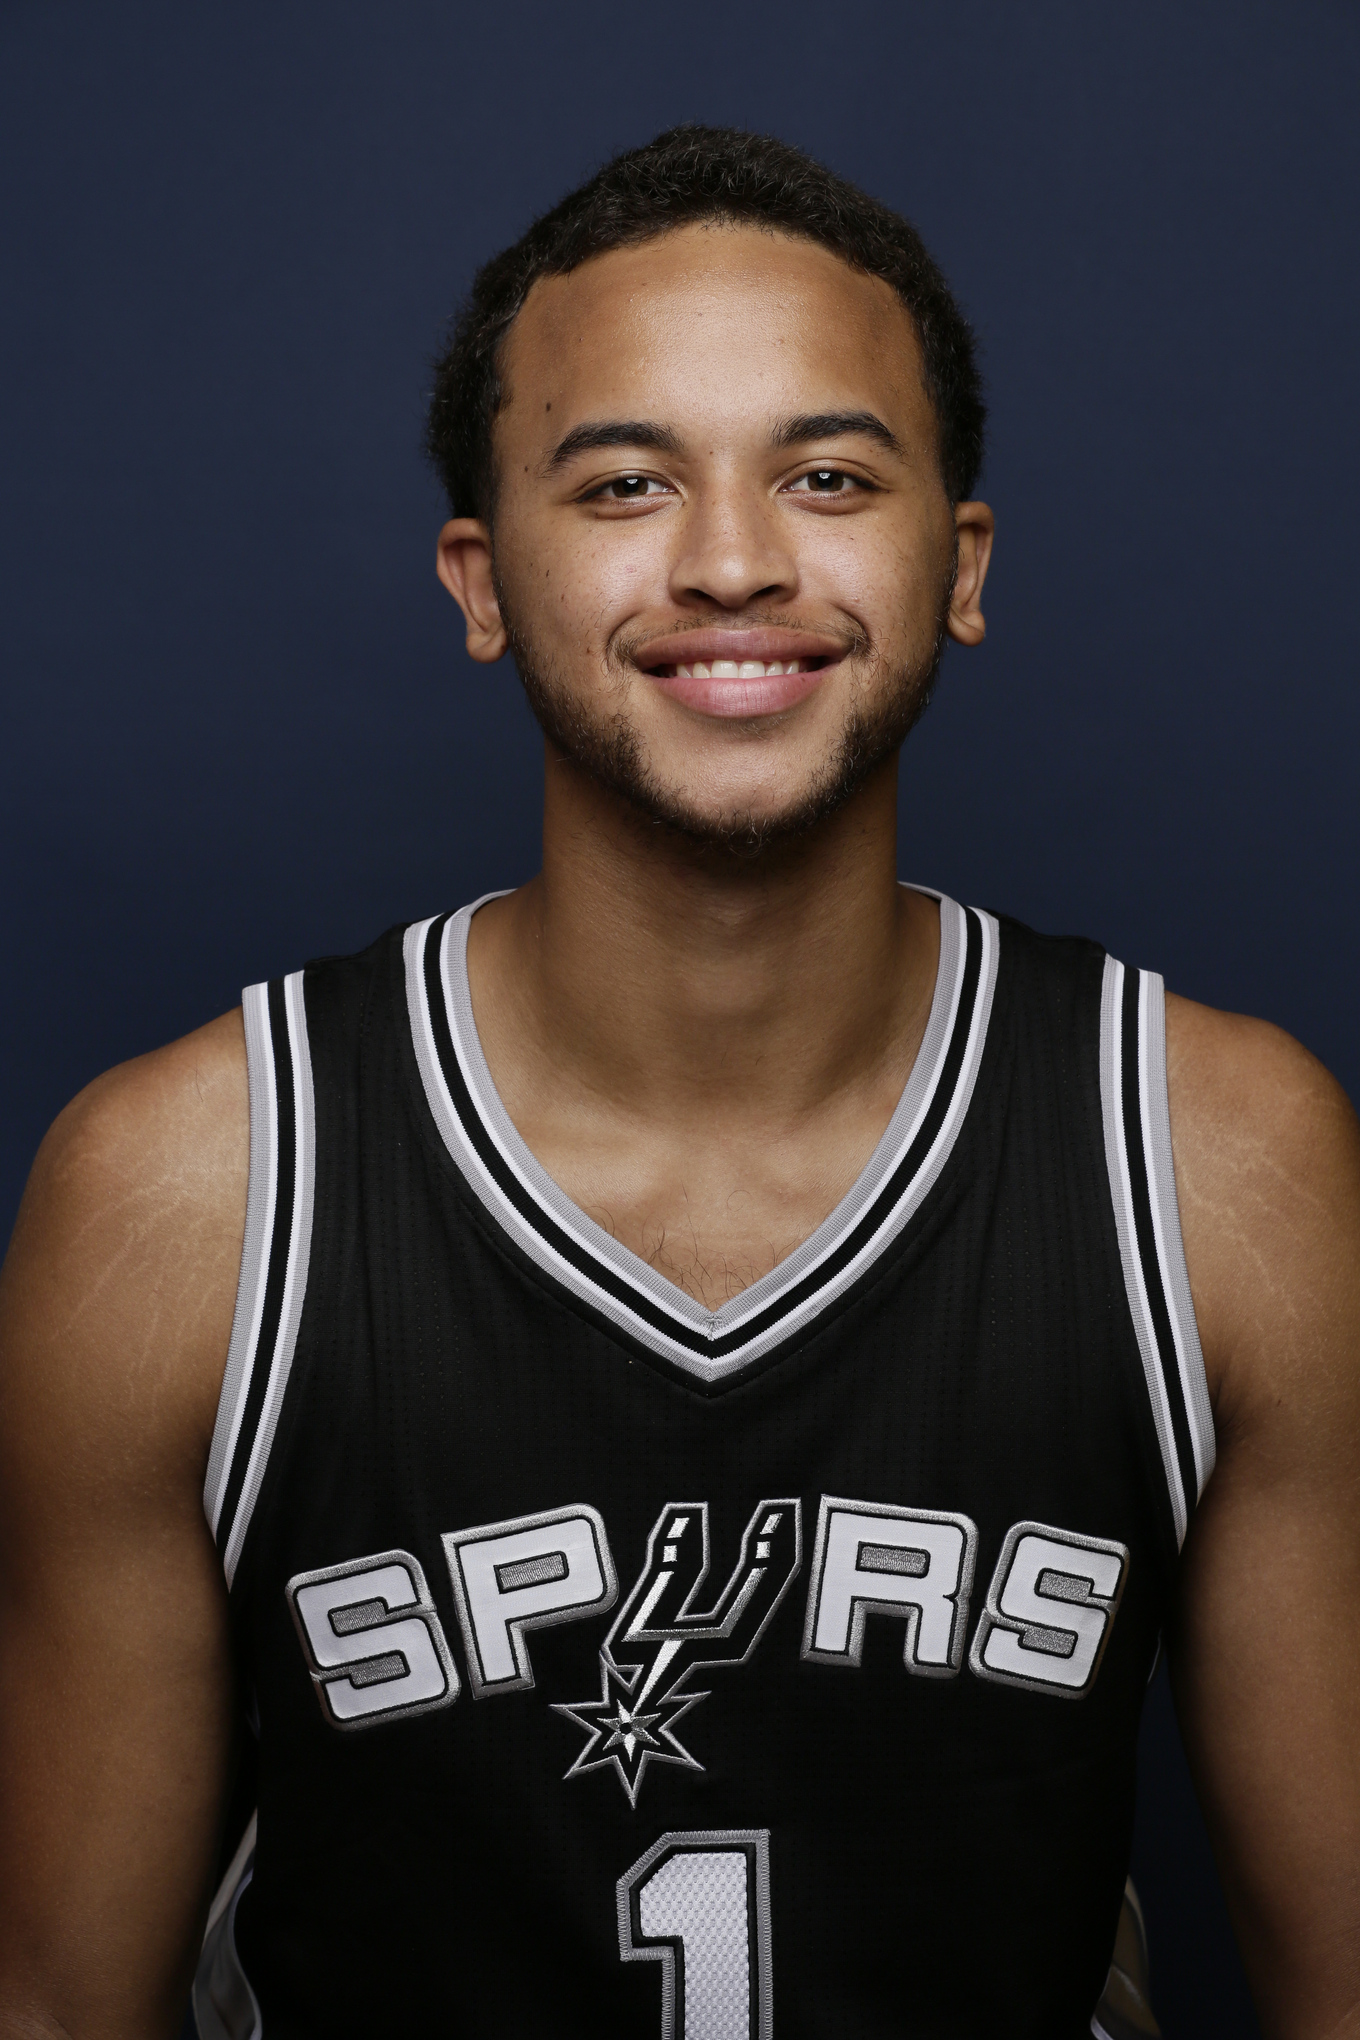 Kyle-anderson-nba-rookie-day-15